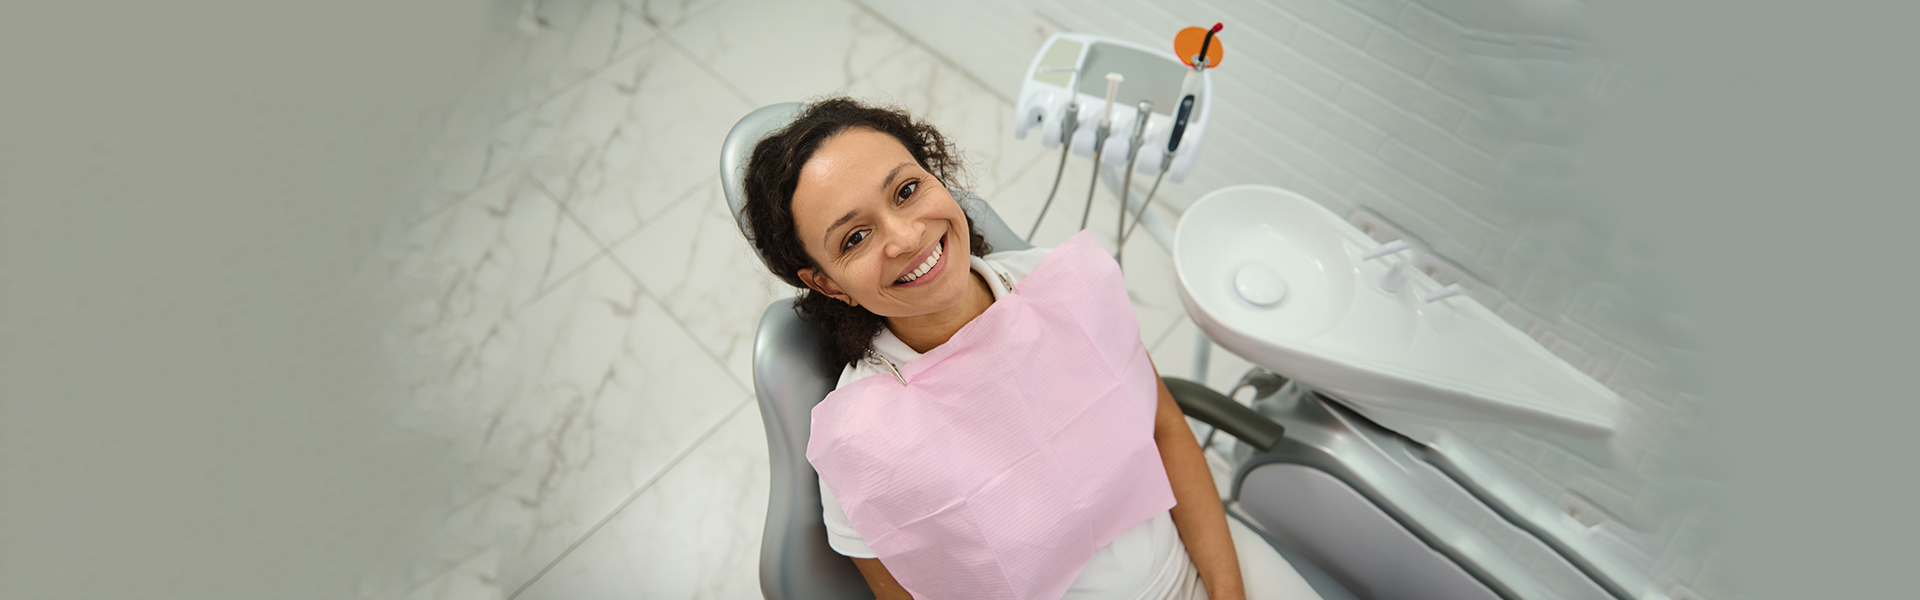 Can You Really Relax in the Dentist’s Chair?